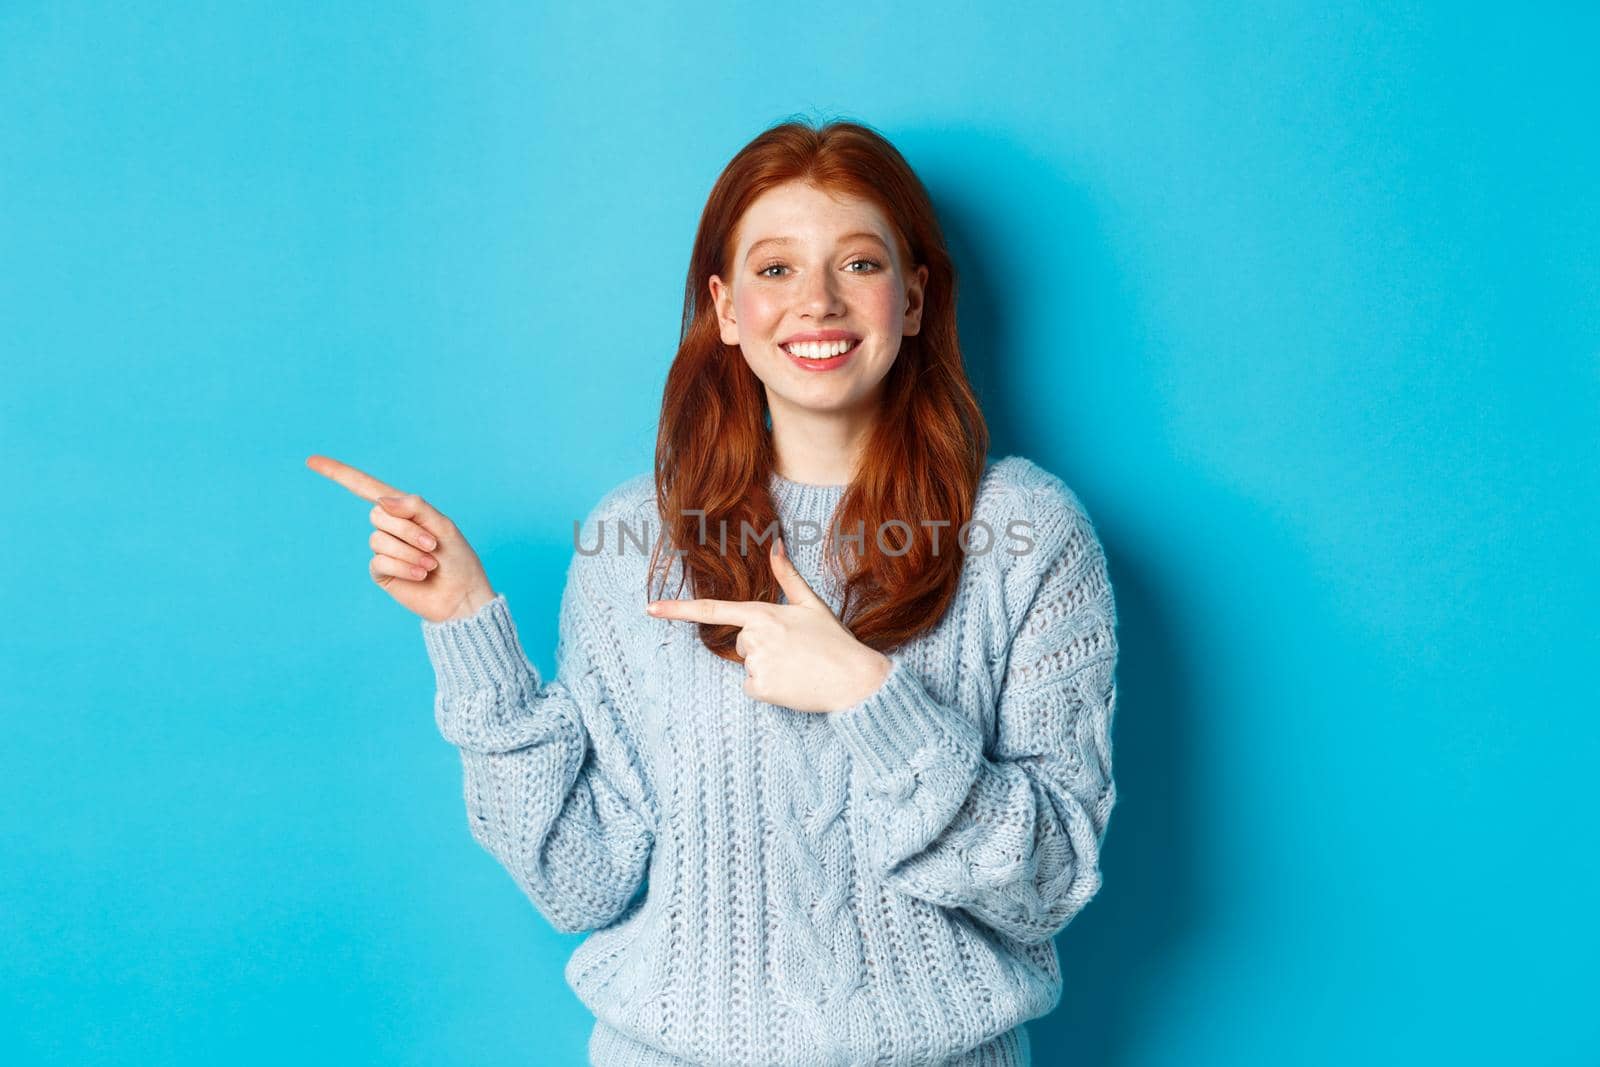 Cute teenager girl with red hair and freckles, pointing fingers left at logo and smiling, showing advertisement, standing over blue background.